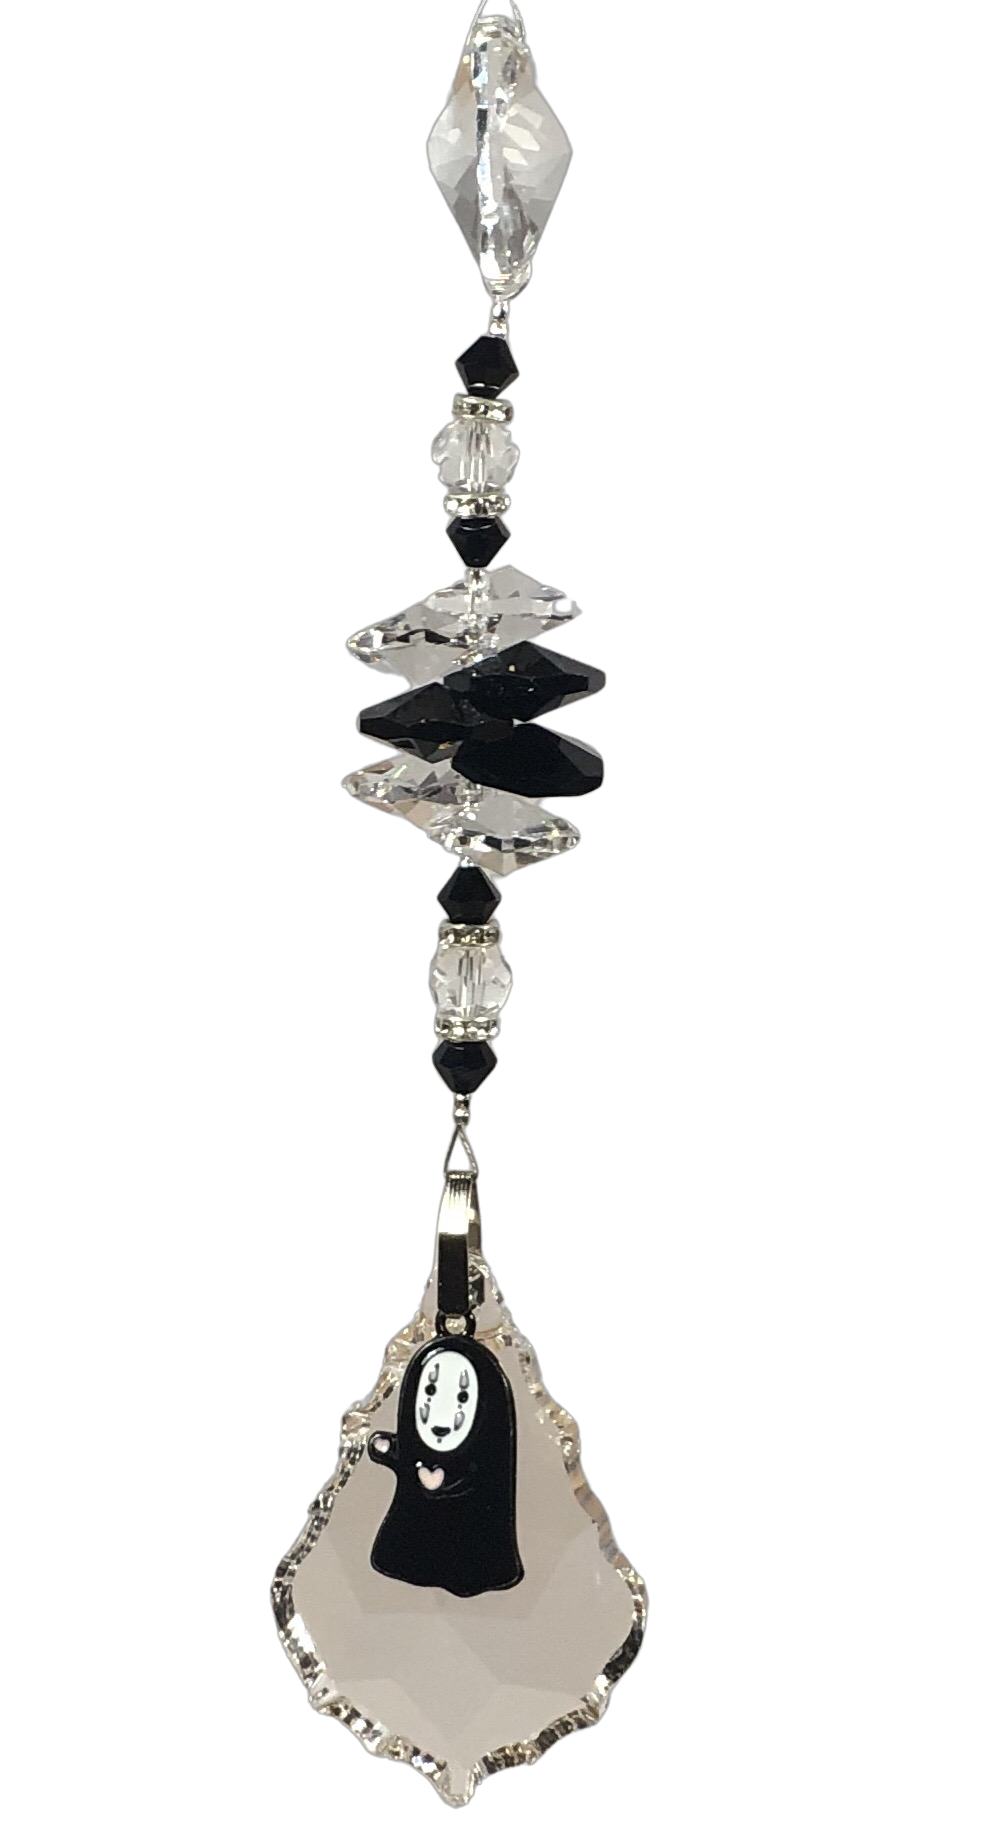 Spirited Away - No Face crystal suncatcher, decorated with 50mm Starburst crystal and snowflake obsidian gemstone.